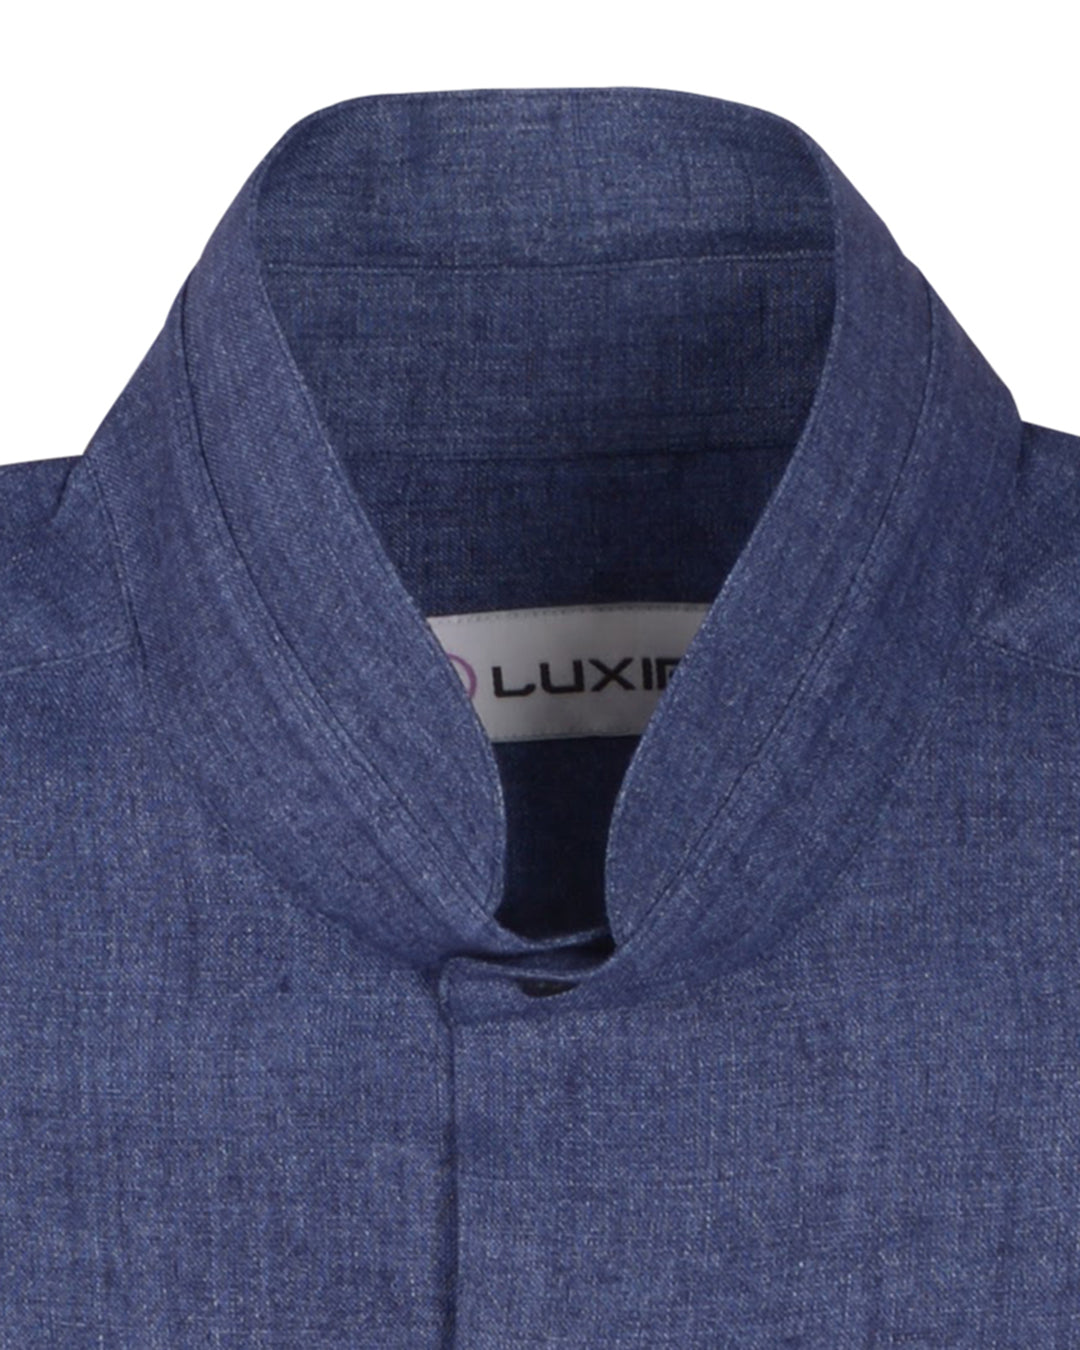 Collar of the custom linen shirt for men in denim indigo blue by Luxire Clothing